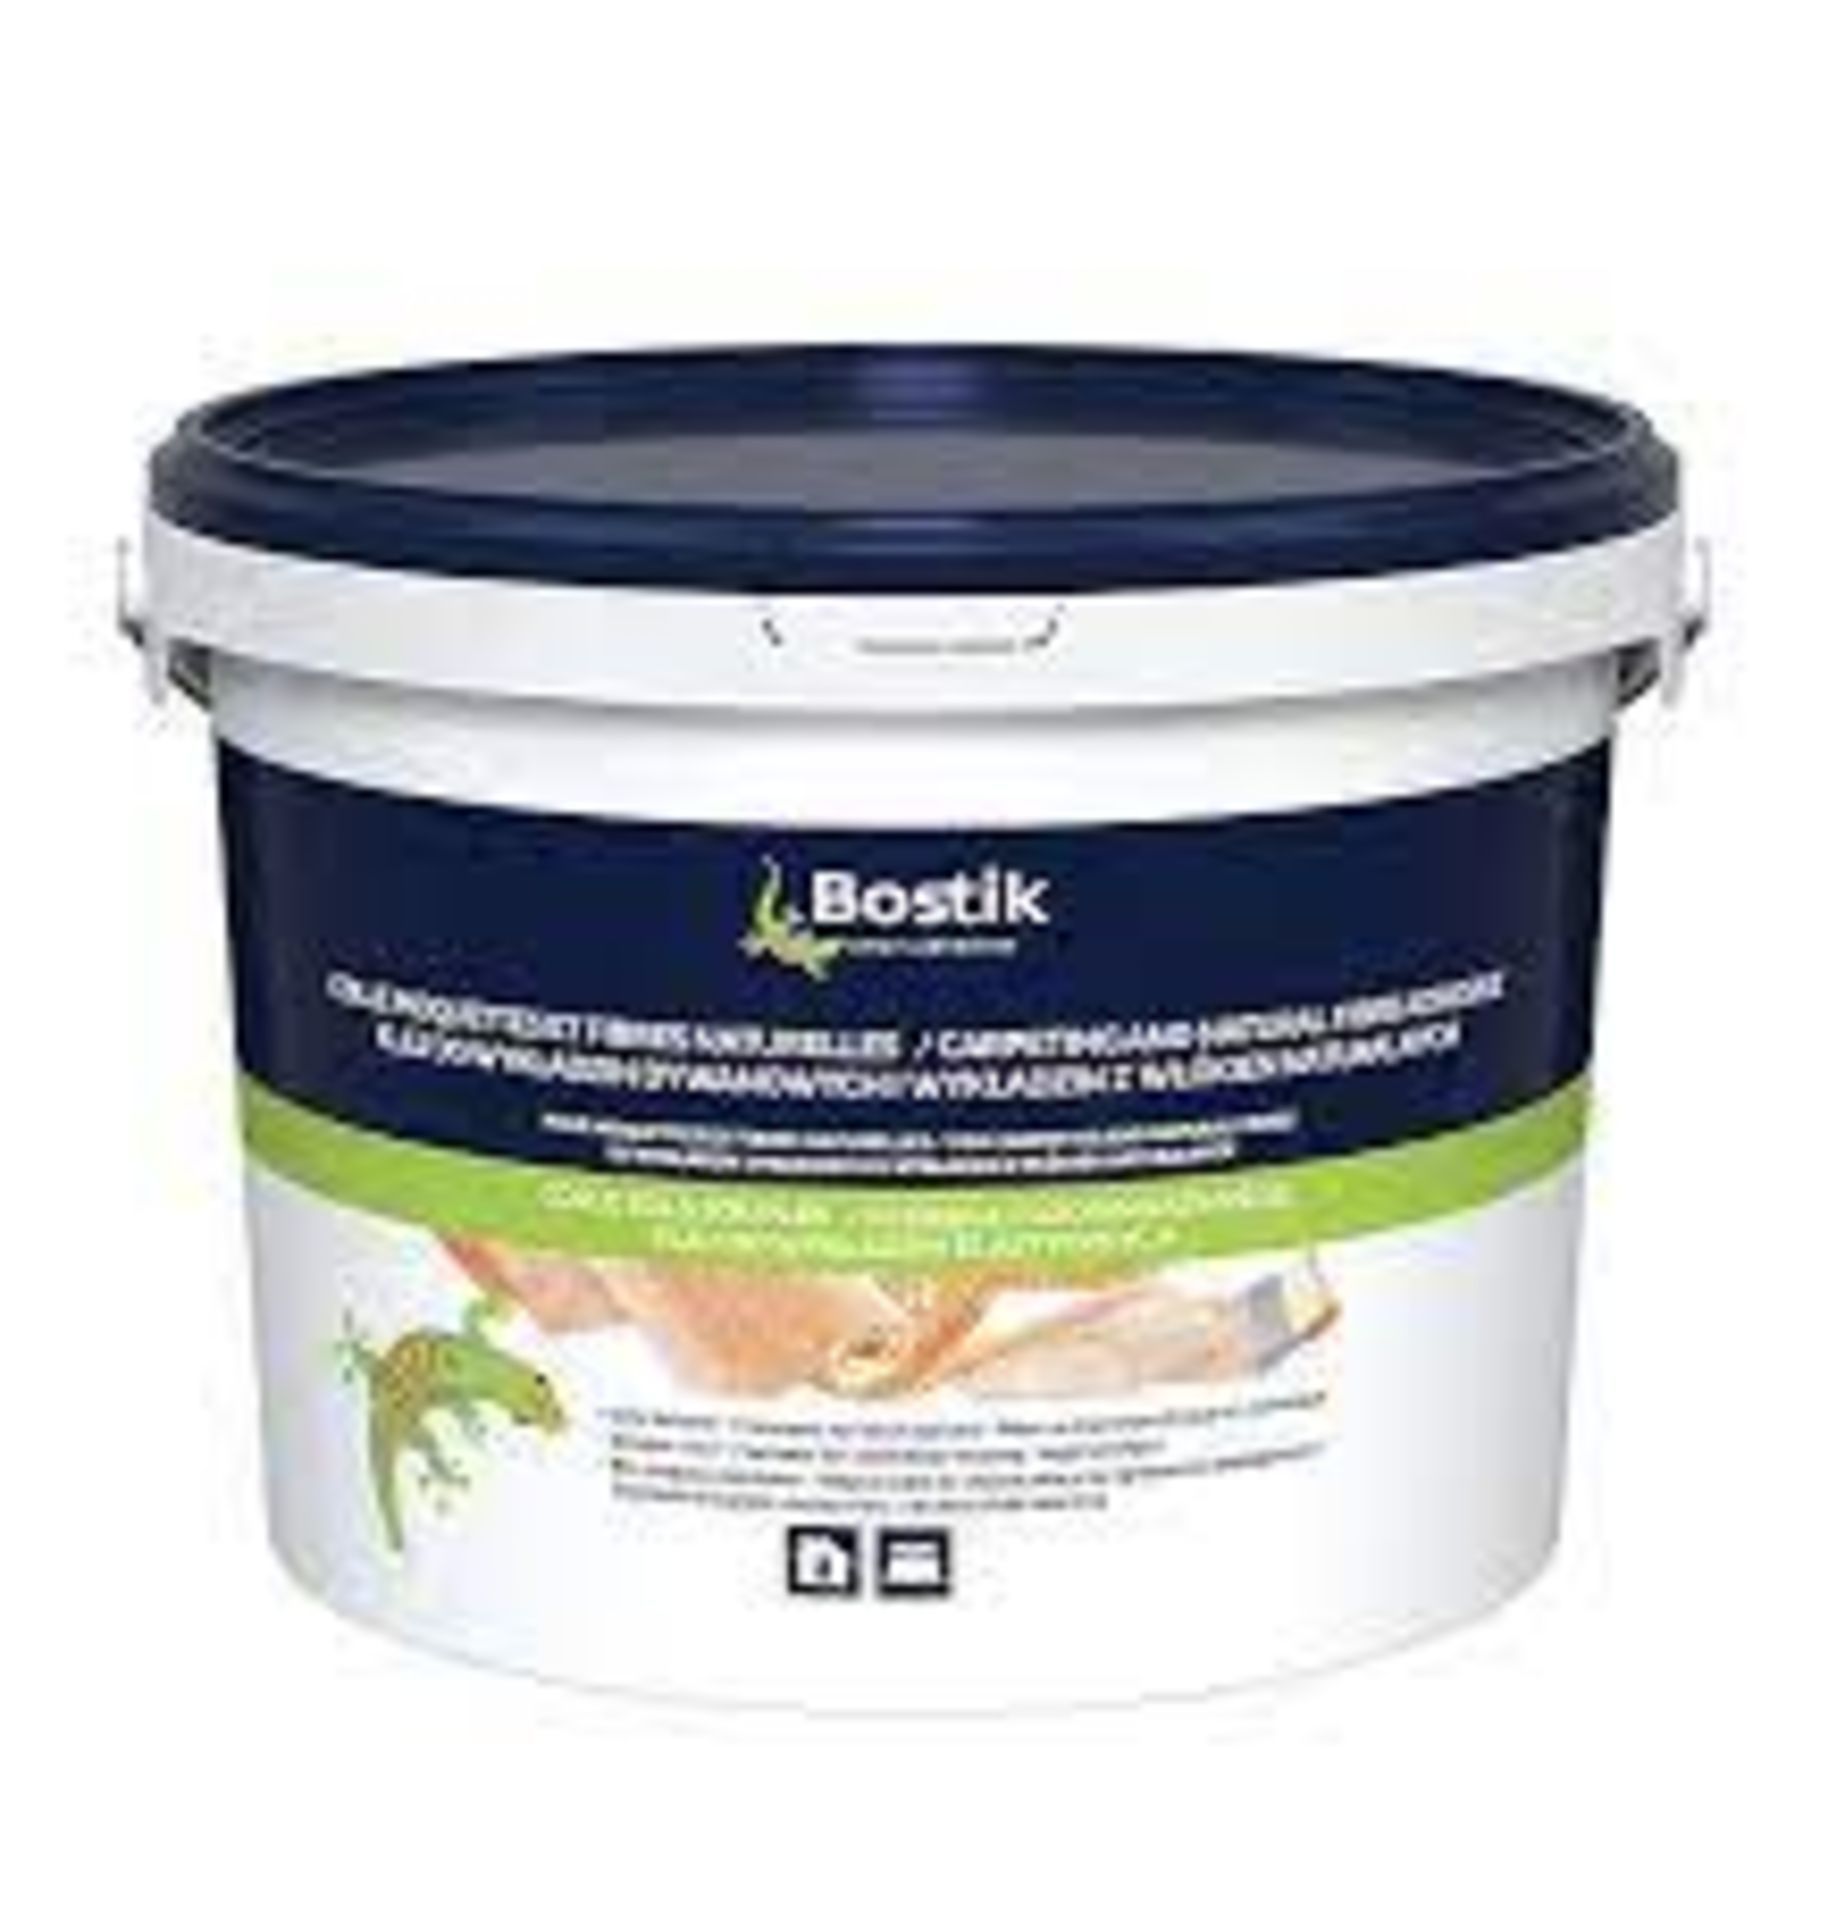 12 X NEW 12KG TUBS OF BOSTIK CARPETING AND NATURAL FIBRE ADHESIVE. SUITABLE FOR UNDER FLOOR HEATING,